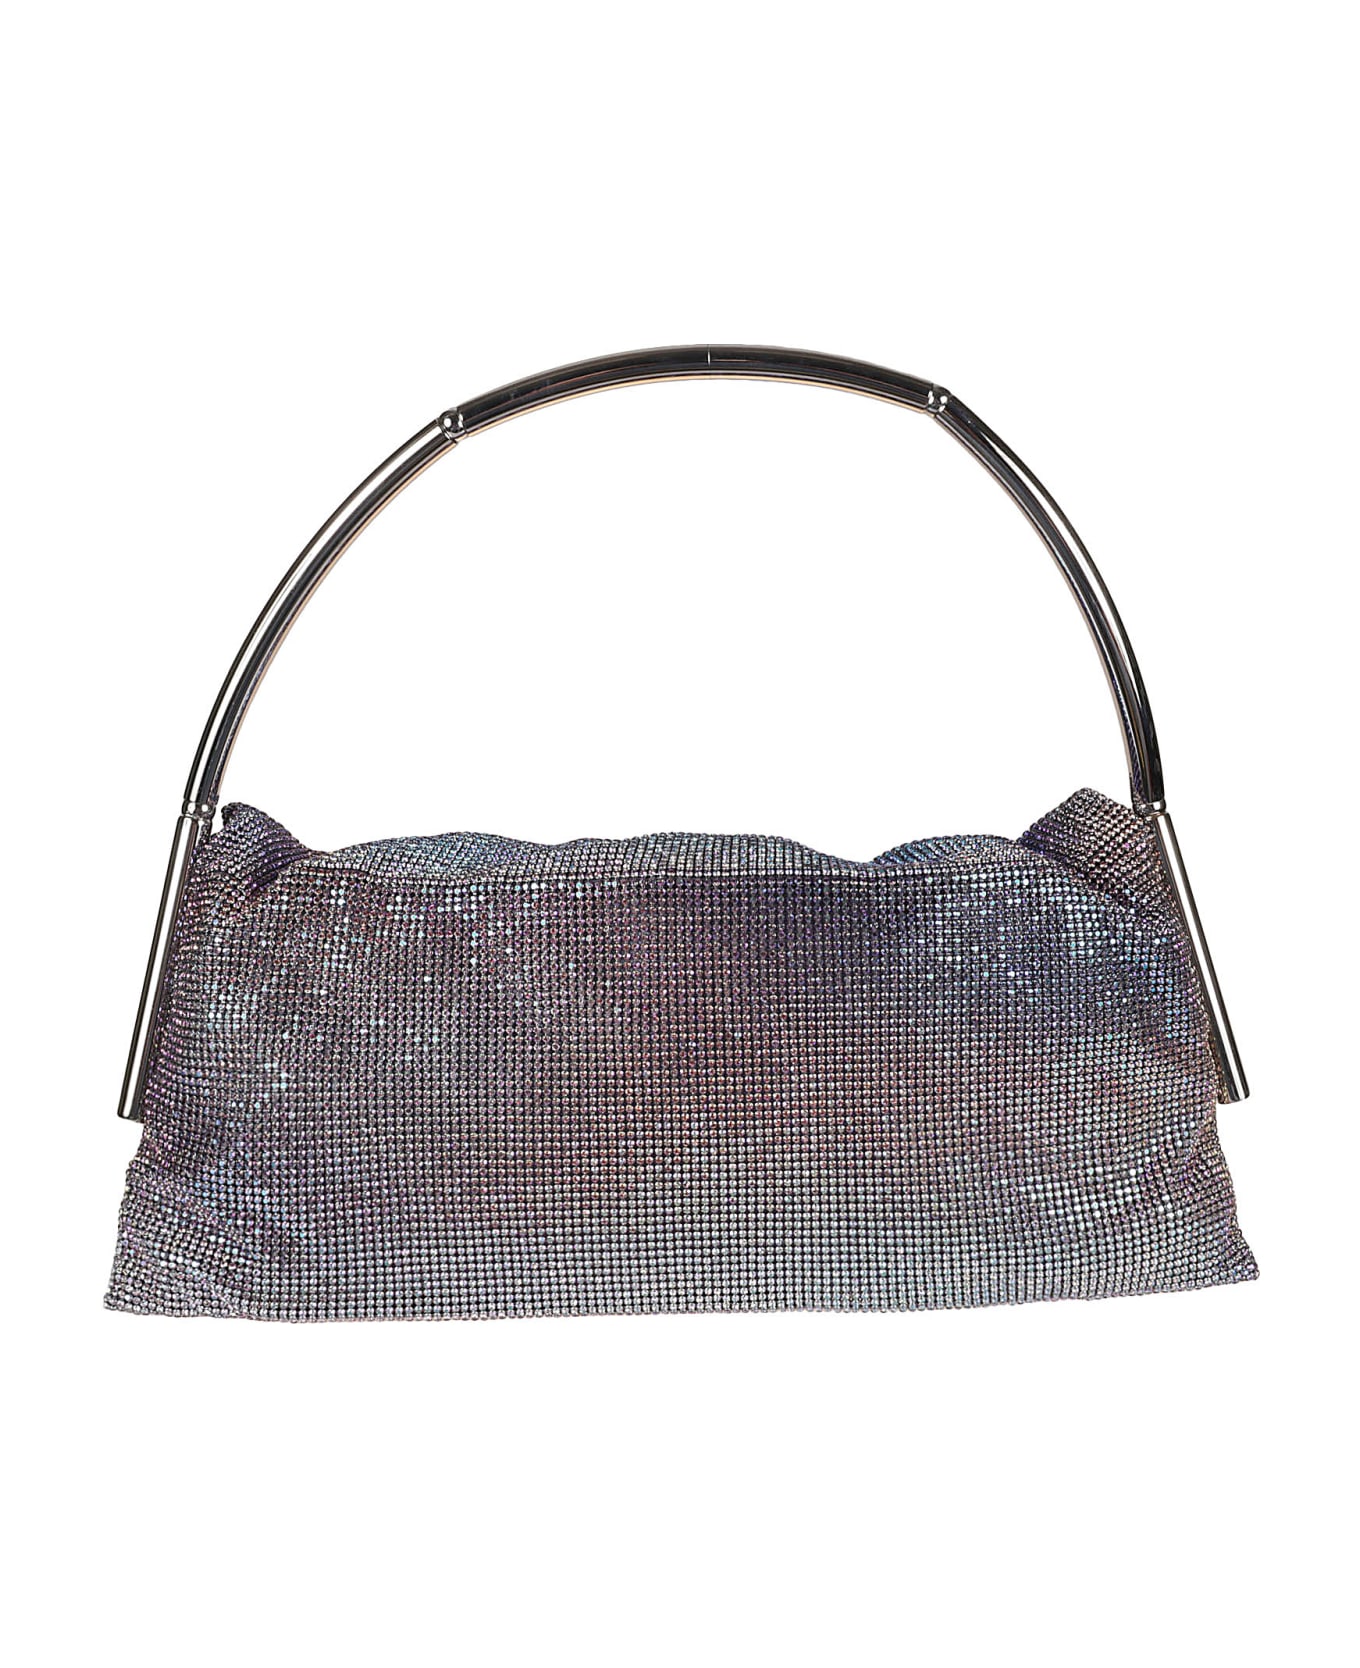 Benedetta Bruzziches Metallic Handle Embellished All-over Tote -  spectre